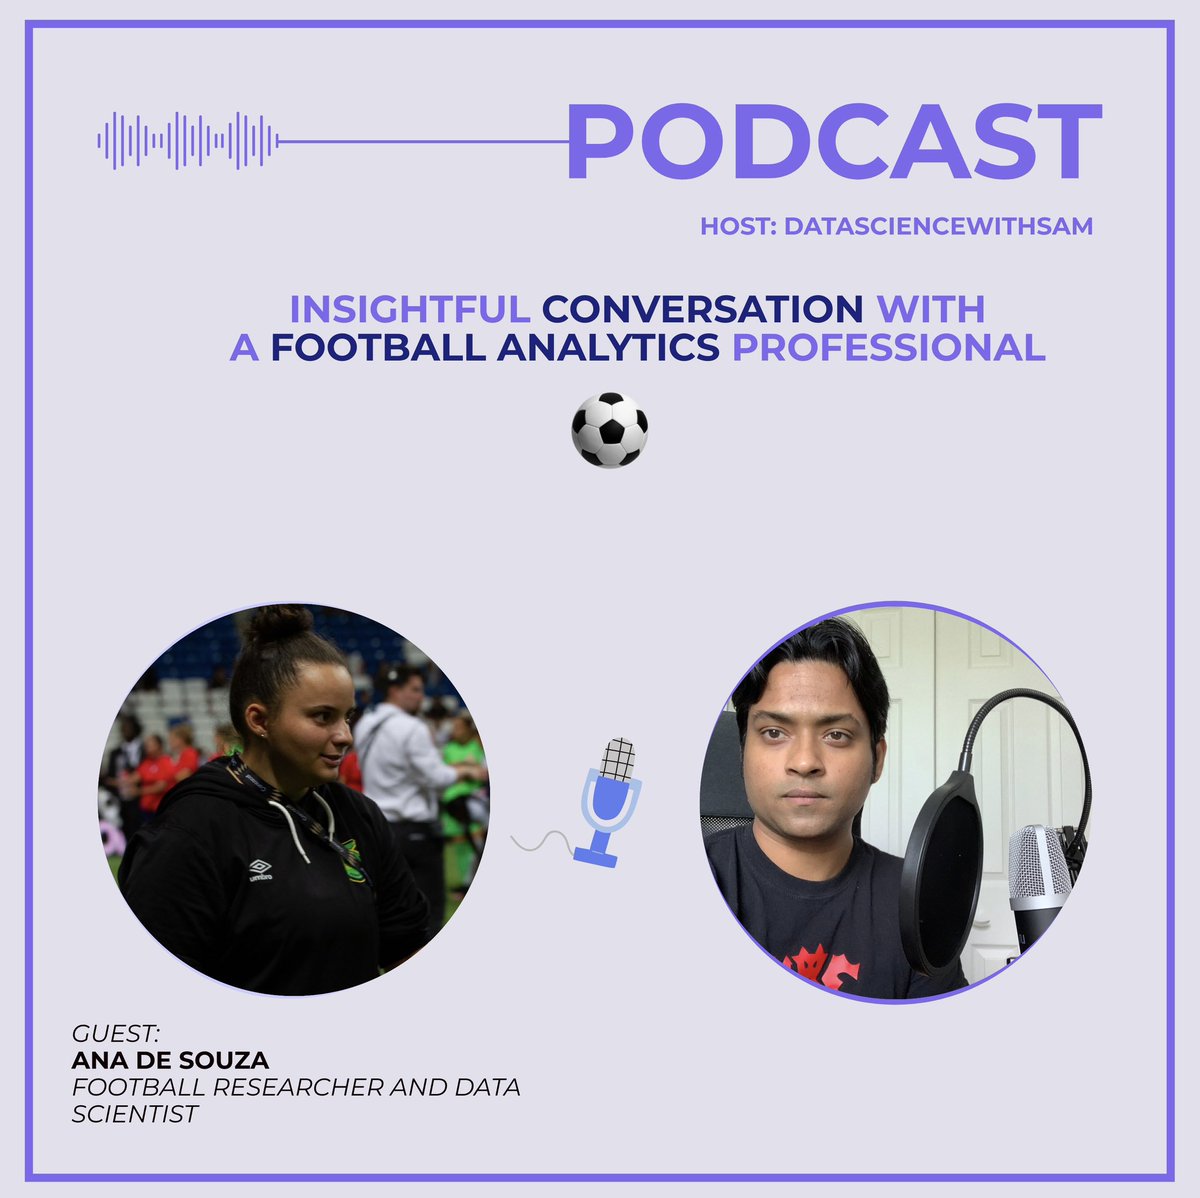 New podcast 🎙️ on #socceranalytics 

Listen and learn about guest speakers Ana De Souza, football researcher and US Soccer C license coach, journey to analytics field. 

📌 Apple podcast link 👉🏼 podcasts.apple.com/us/podcast/dat…

Follow and subscribe to my channel. #DataScience #soccer